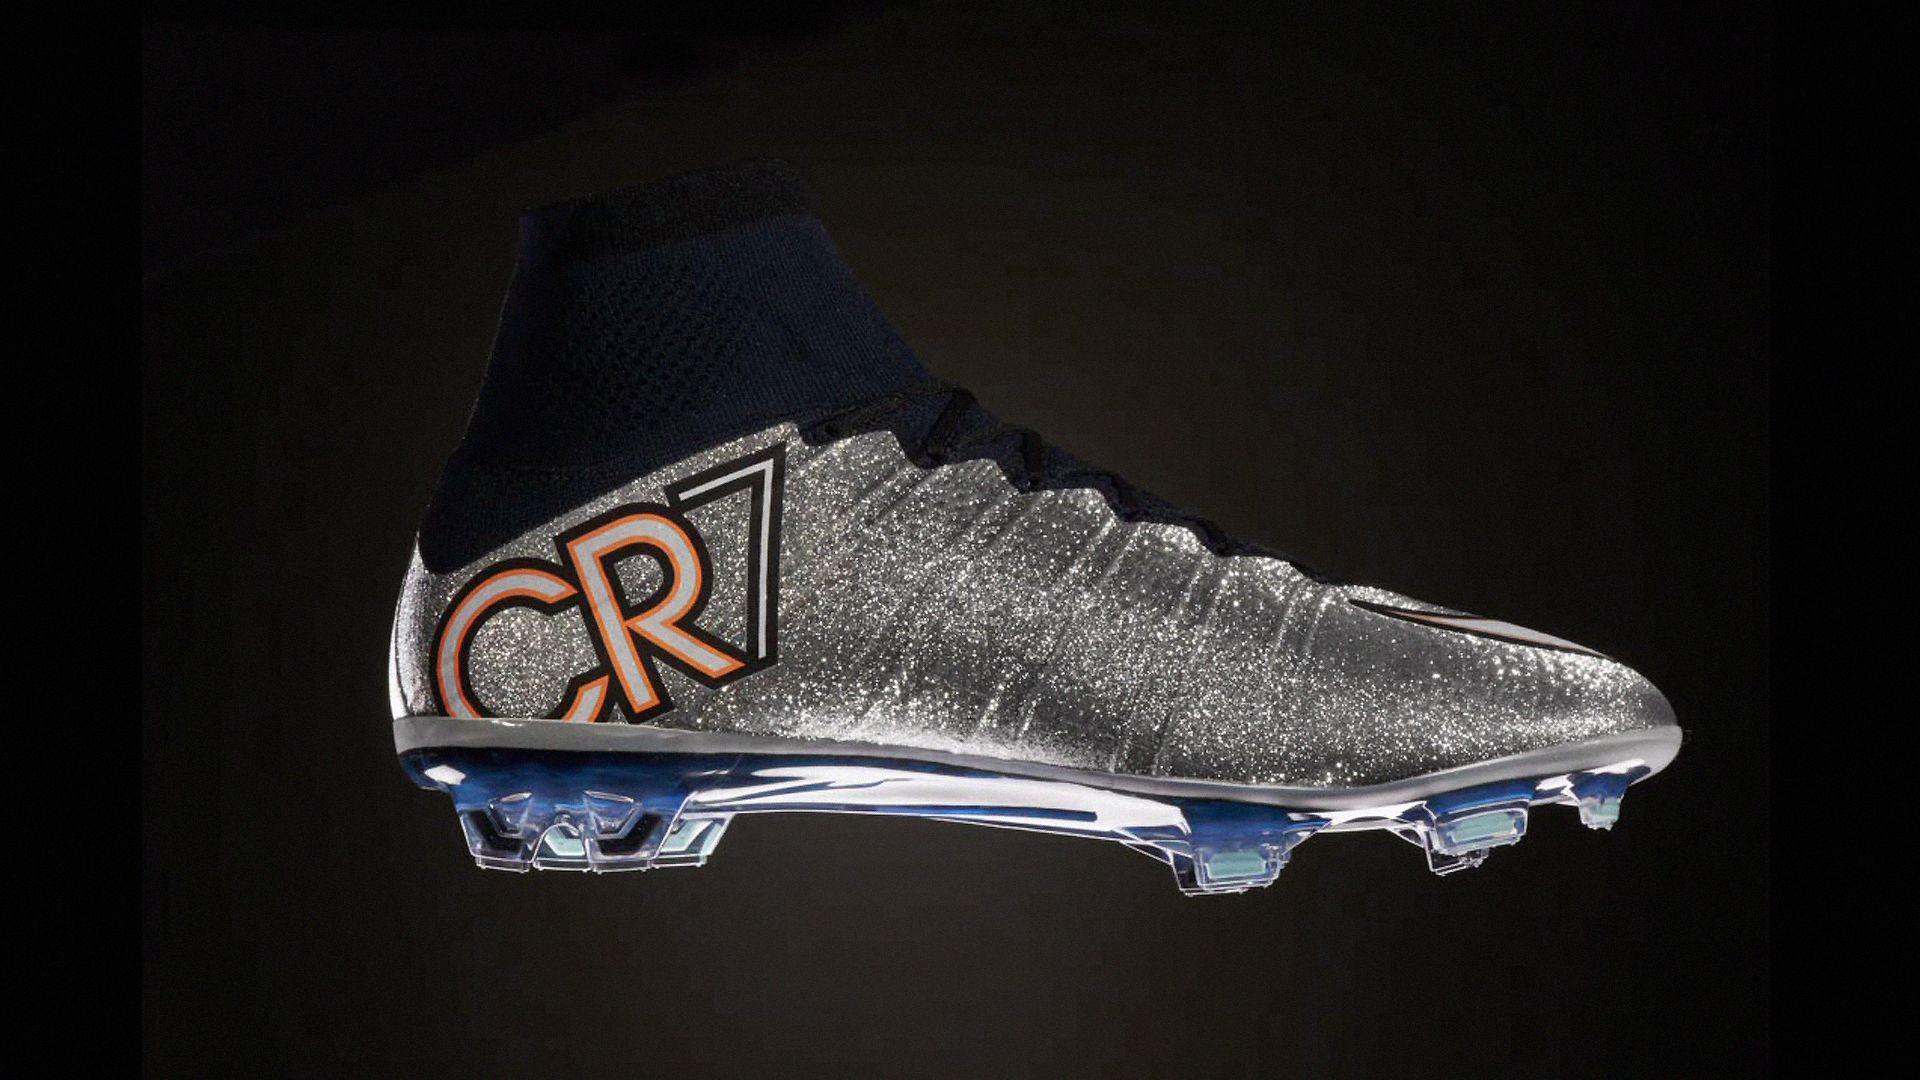 CR7 Shoes Wallpapers Wallpaper Cave